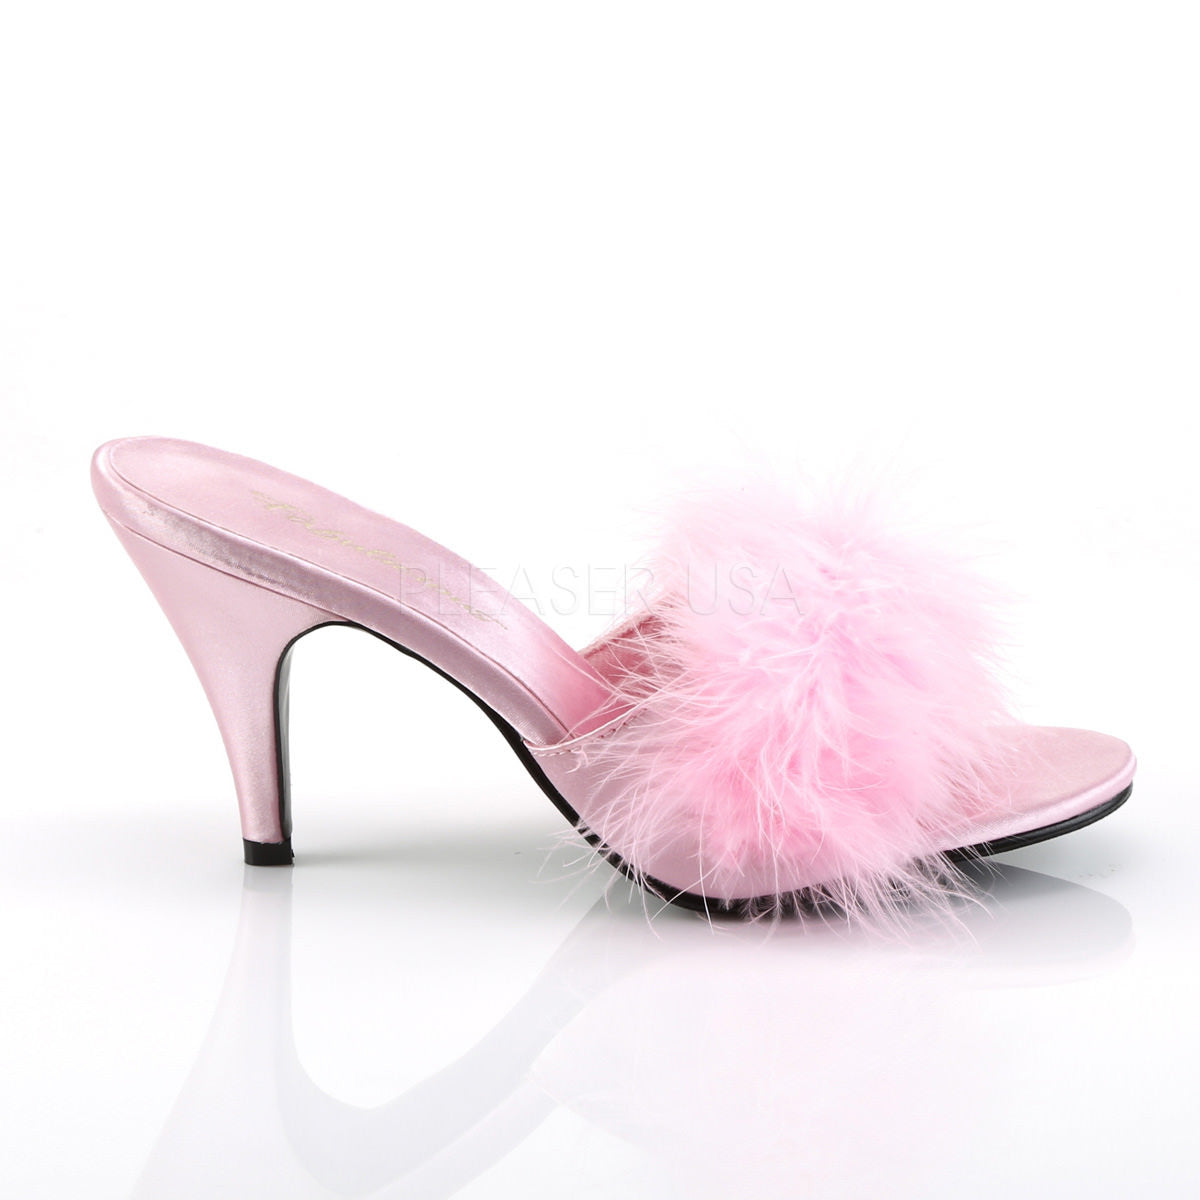 3" Heel AMOUR-03 Baby Pink